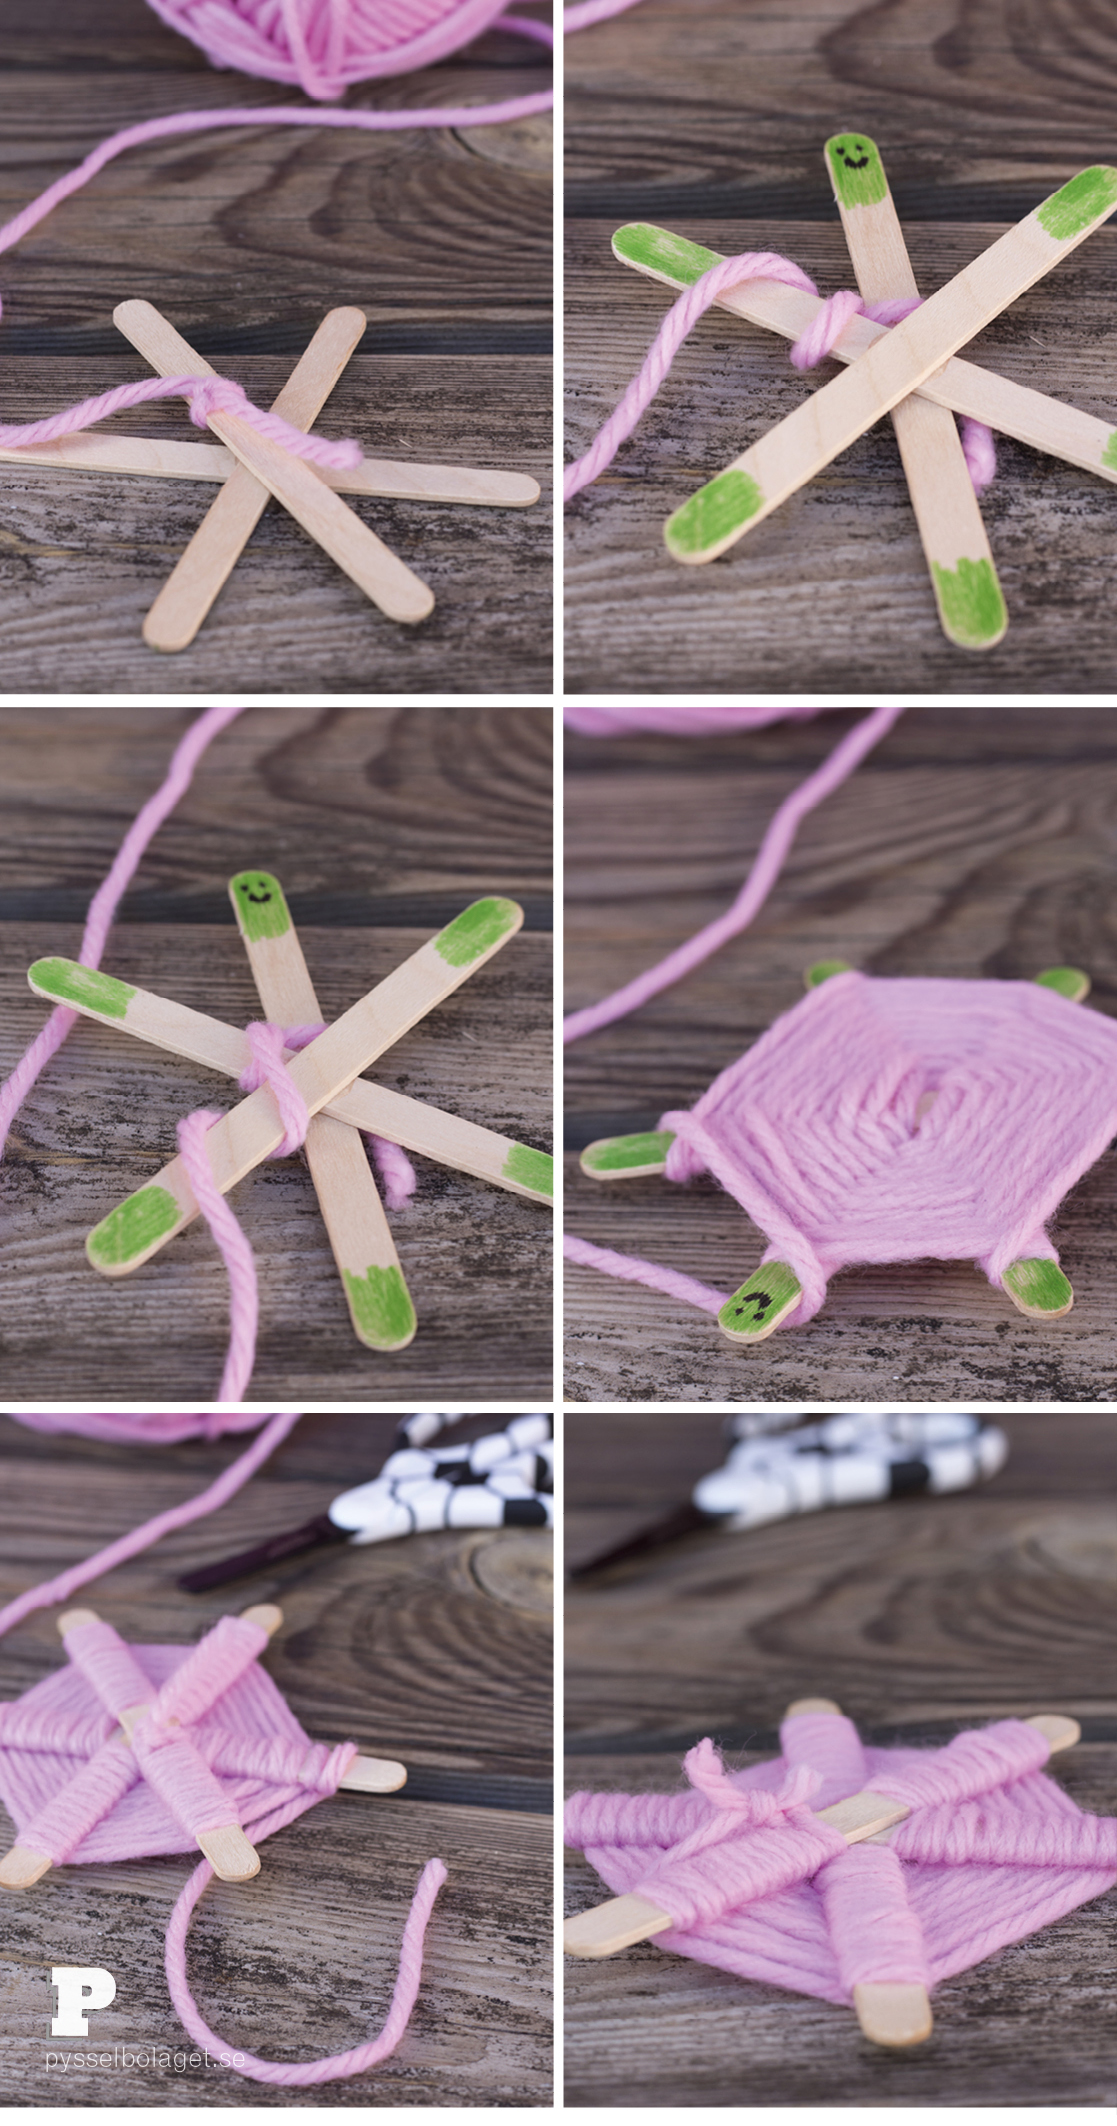 Popsicle stick turtles by Pysselbolaget